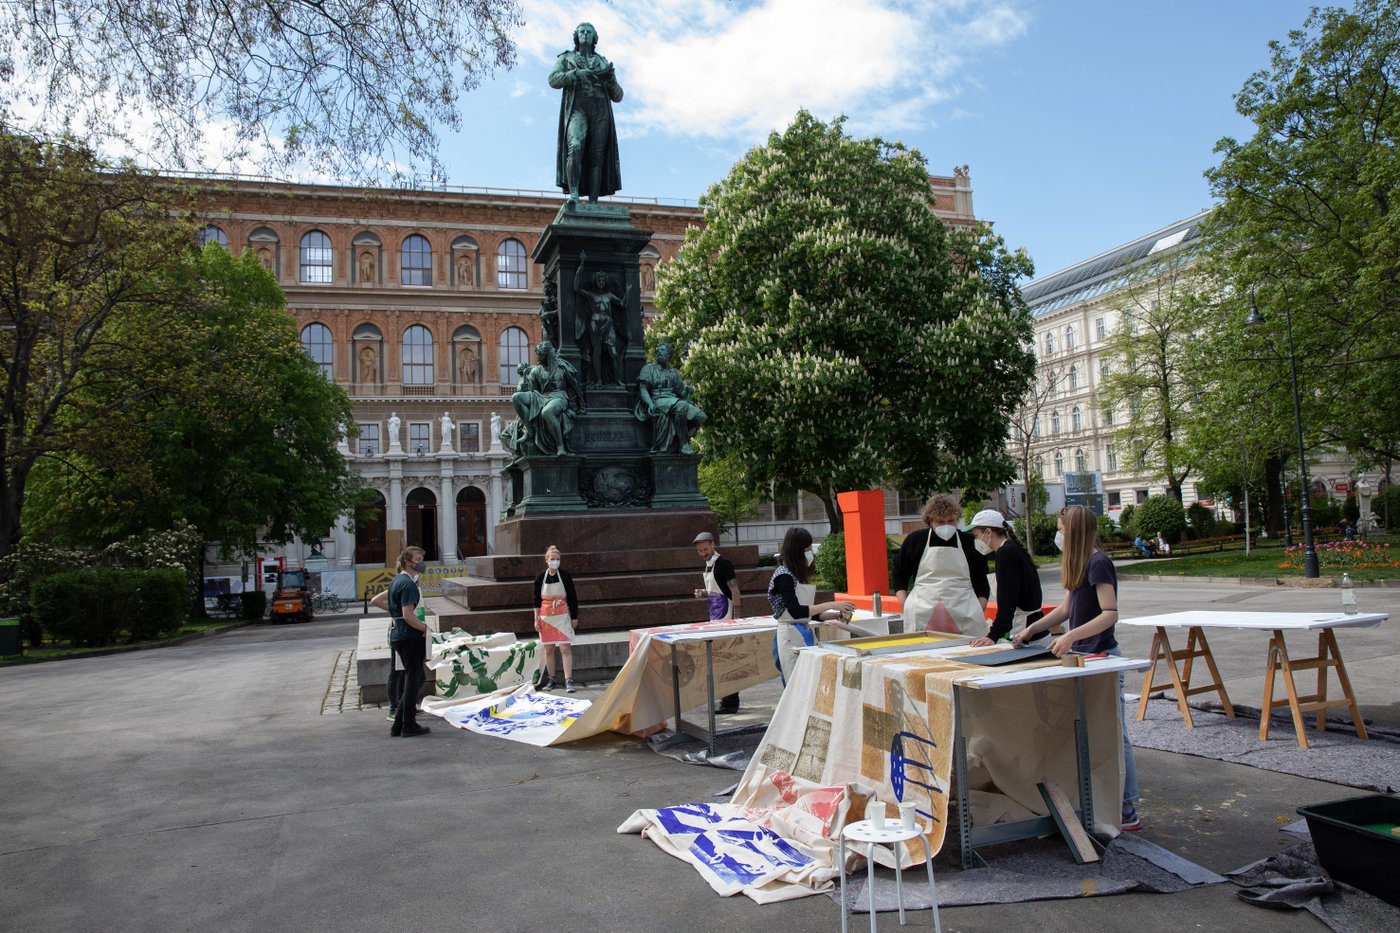 Students print on fabric in front of the Schiller monument. In the background you can see the academy building.